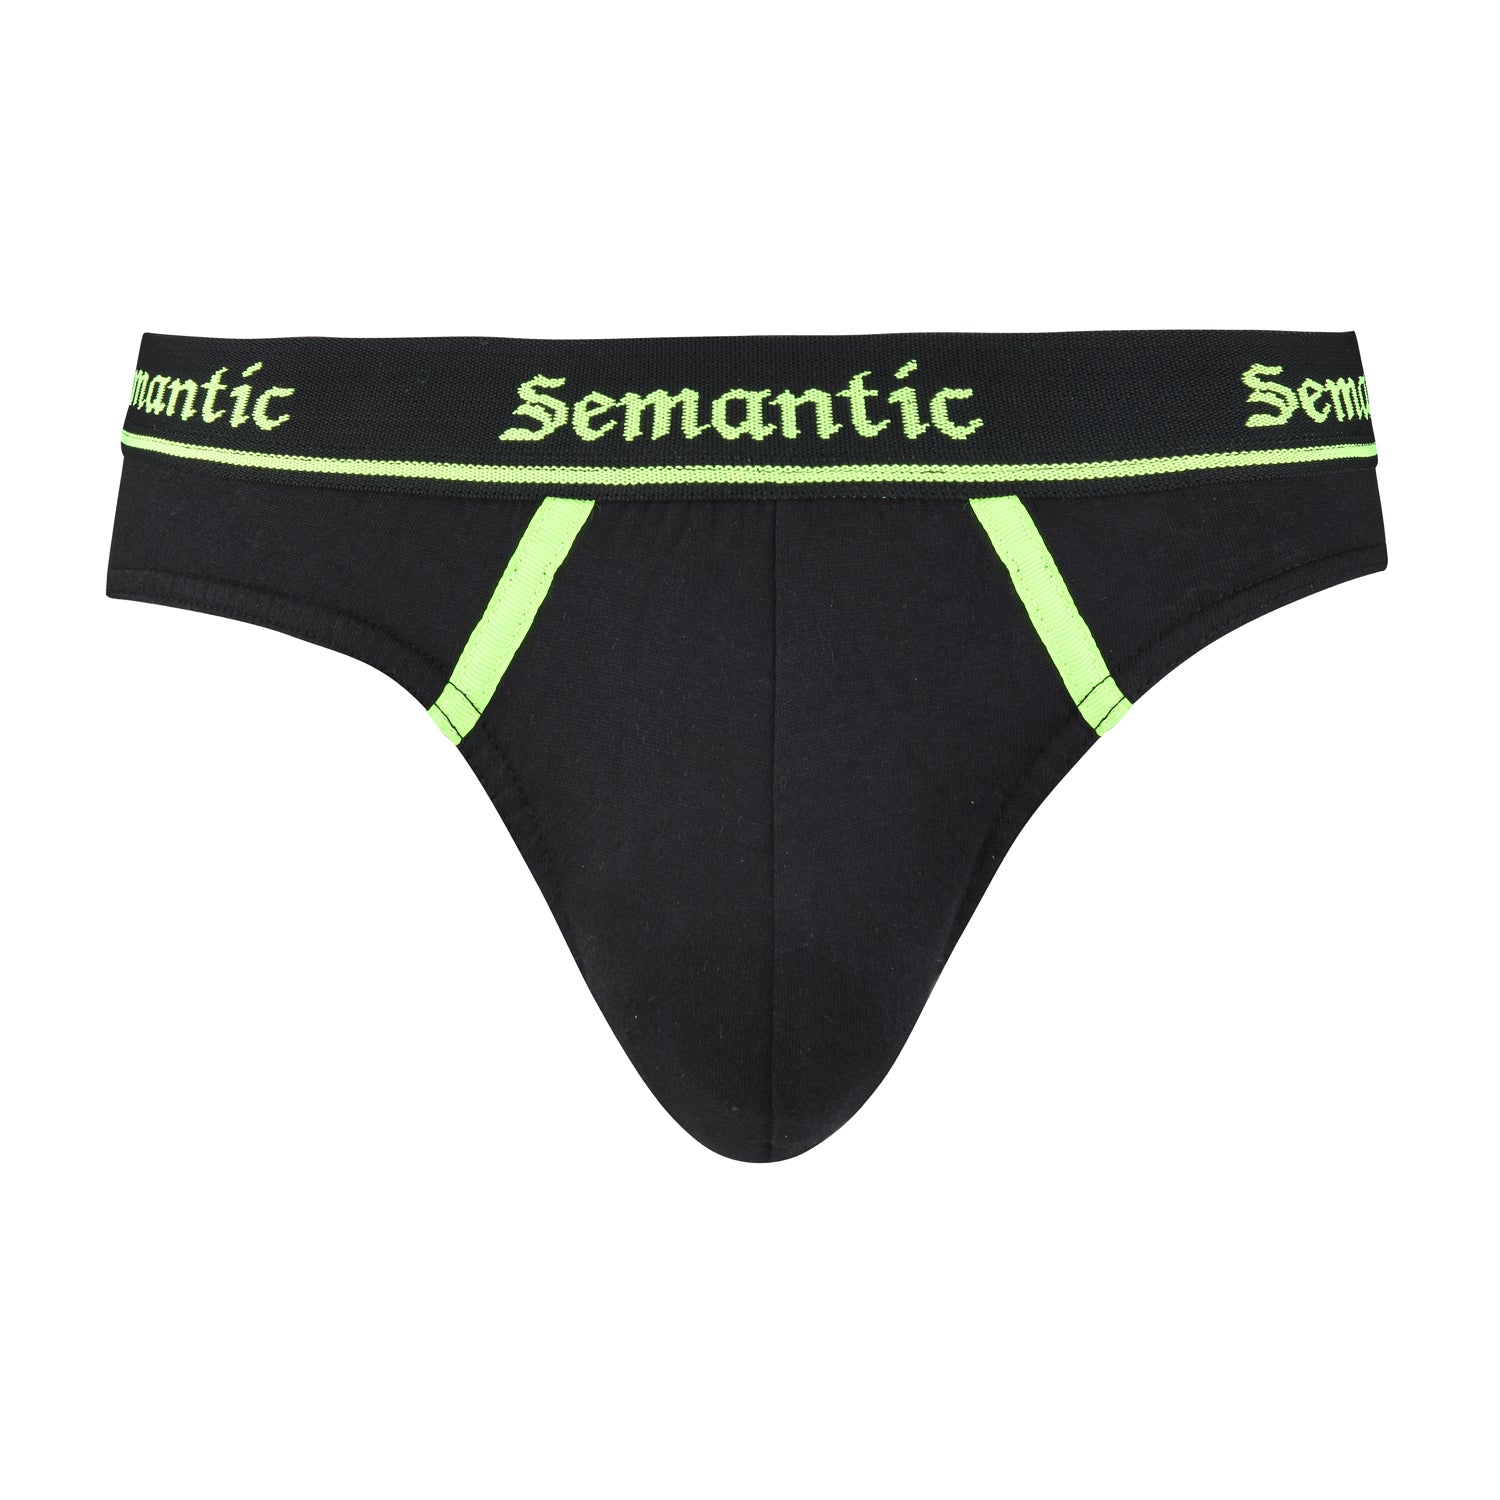 Semantic Cotton Briefs - Designer Waistband with Tape- Solid